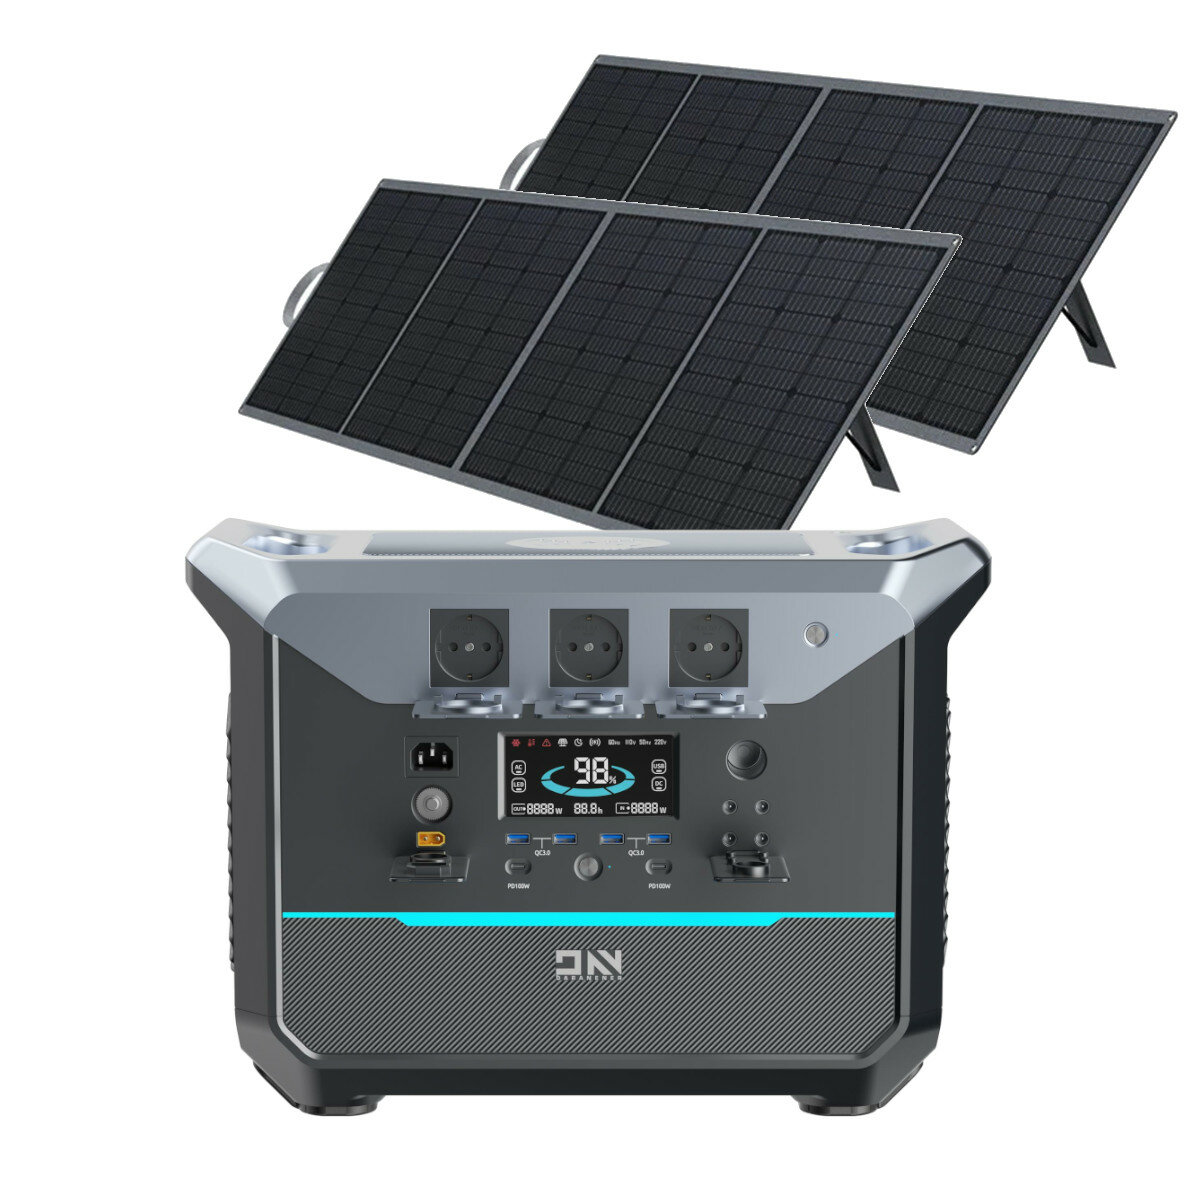 [EU Direct] DaranEner NEO2000 2000W 2073.6Wh LiFePO4 Battery Portable Power Station with 2Pc SP200 200W ETFE Solar Panel, UPS Power Supply AC Sockets with 1.8 Hours Fast Charging Solar Powered Generator for Home Outdoors Camping Travel RV